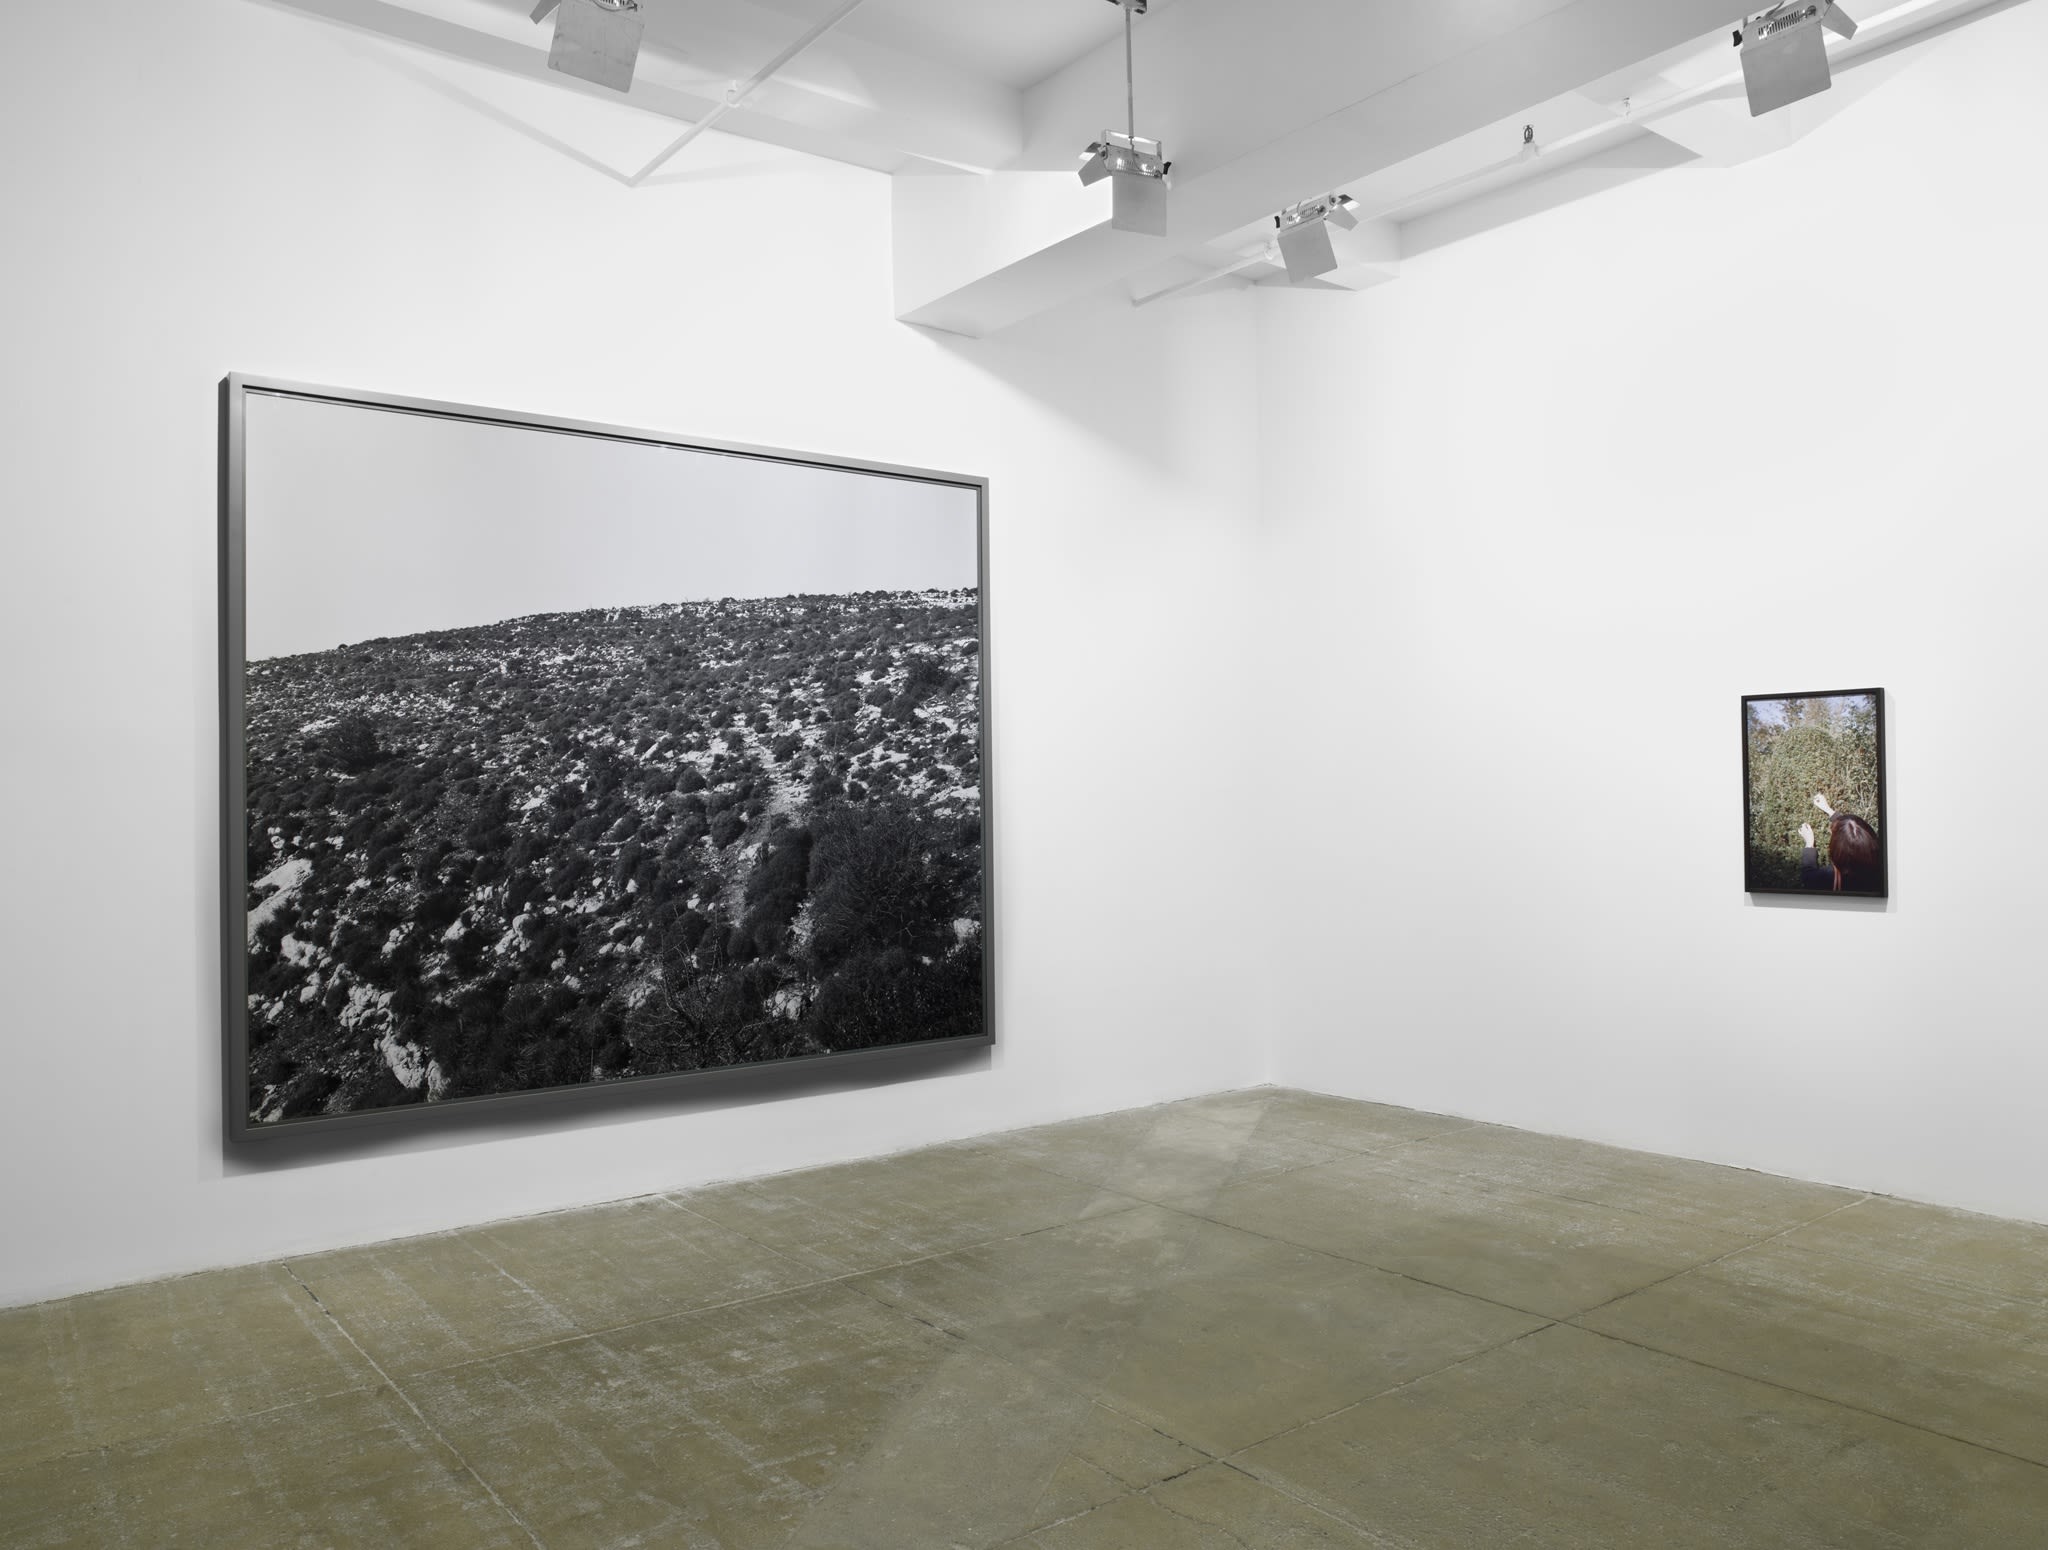 On the left hangs a large, framed black and white photograph of a horizon line. On the right hangs a small, framed color photograph of foliage. 